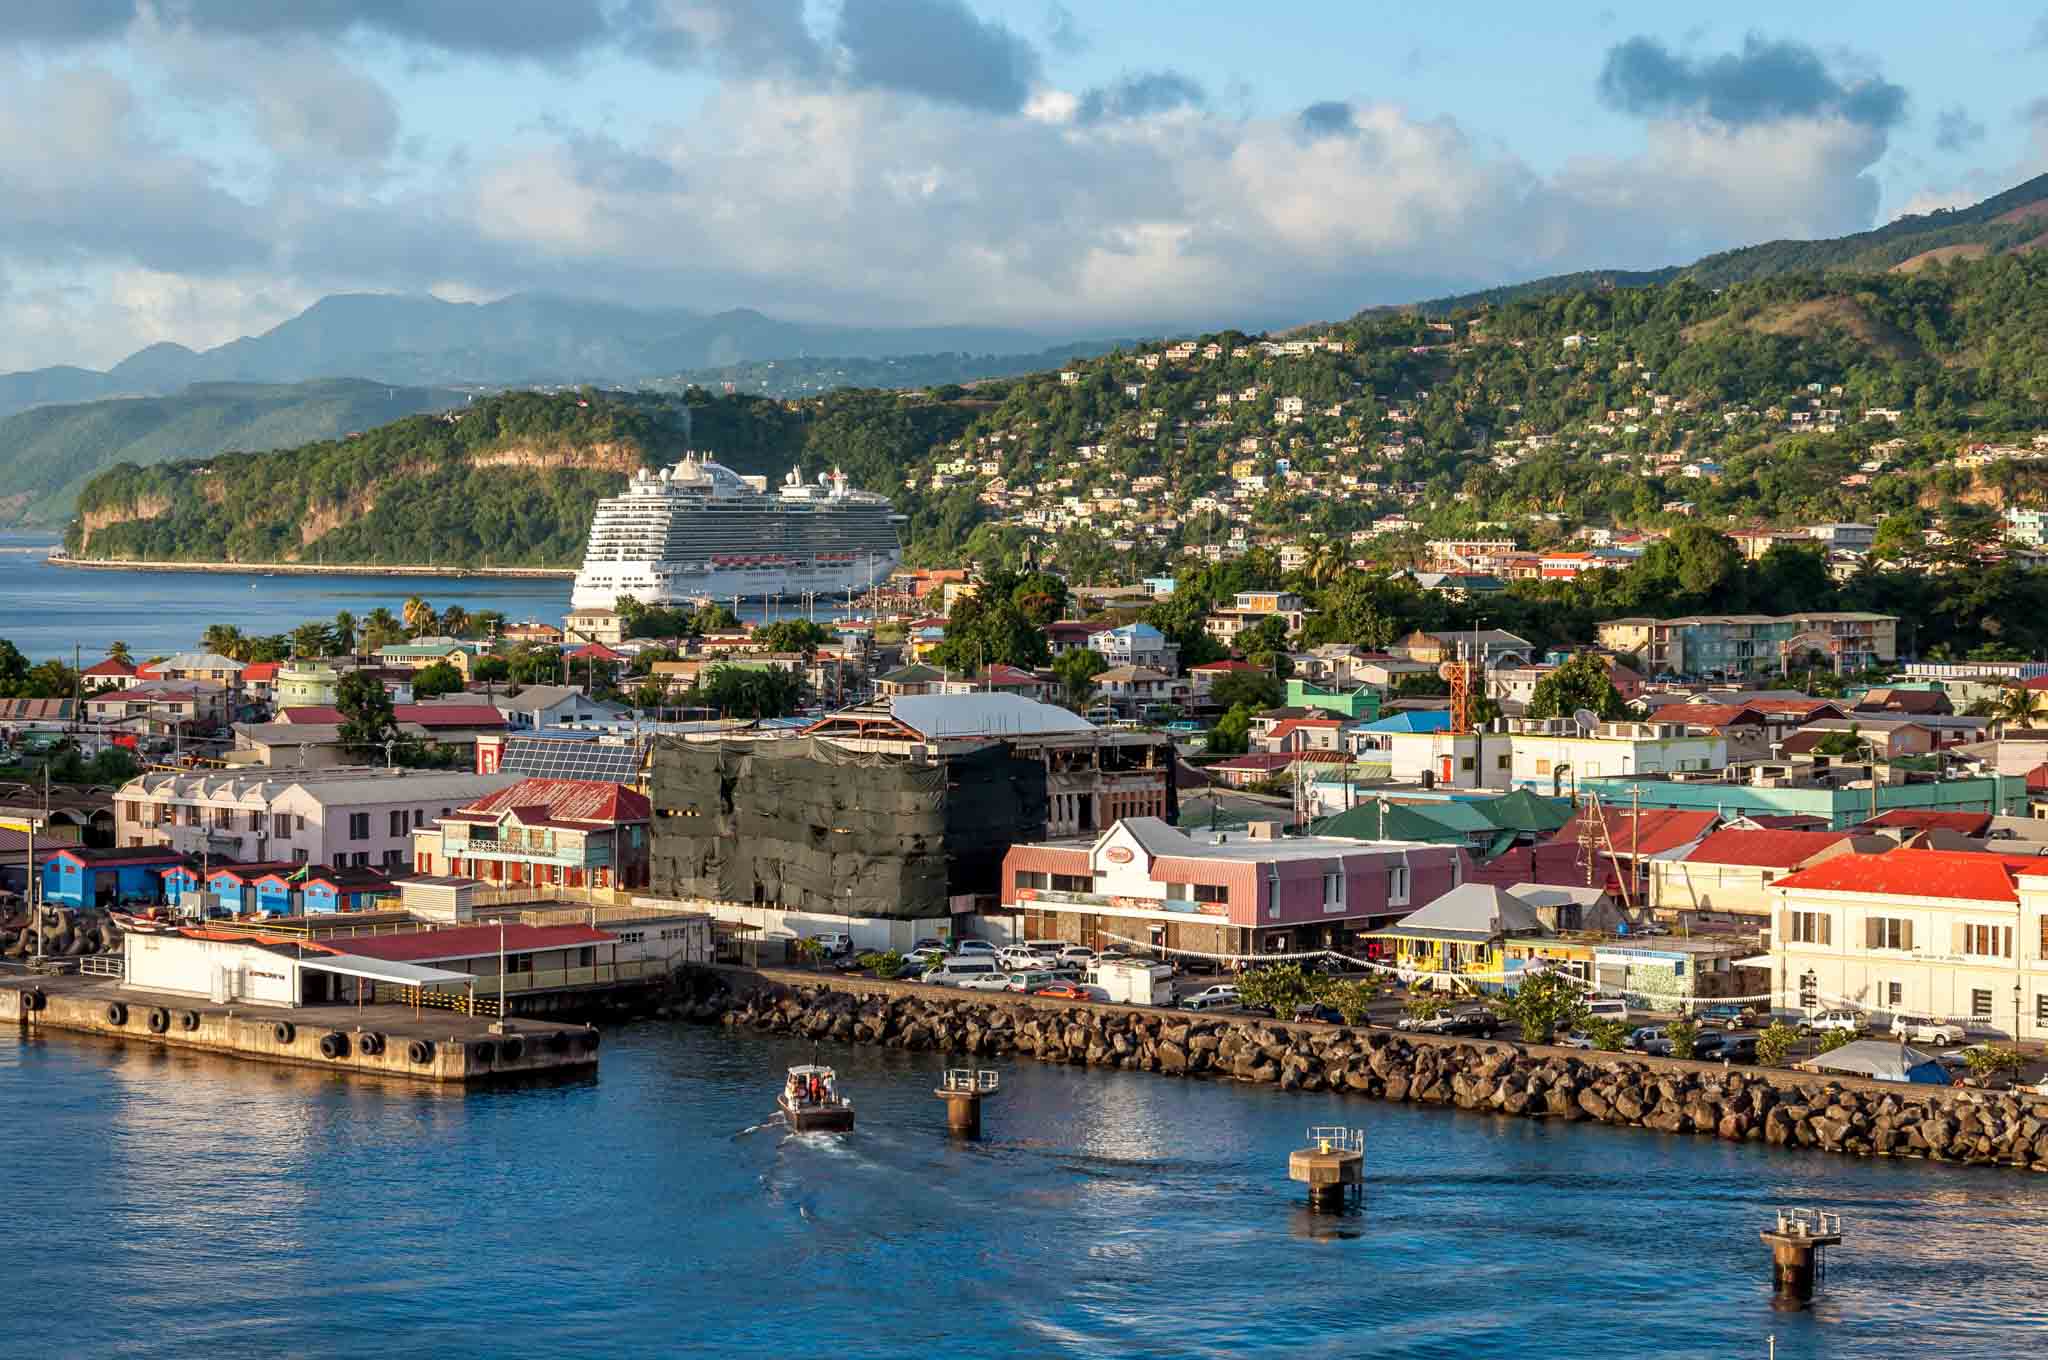 Cruise ship in the port of Roseau, Dominica with hills in the background